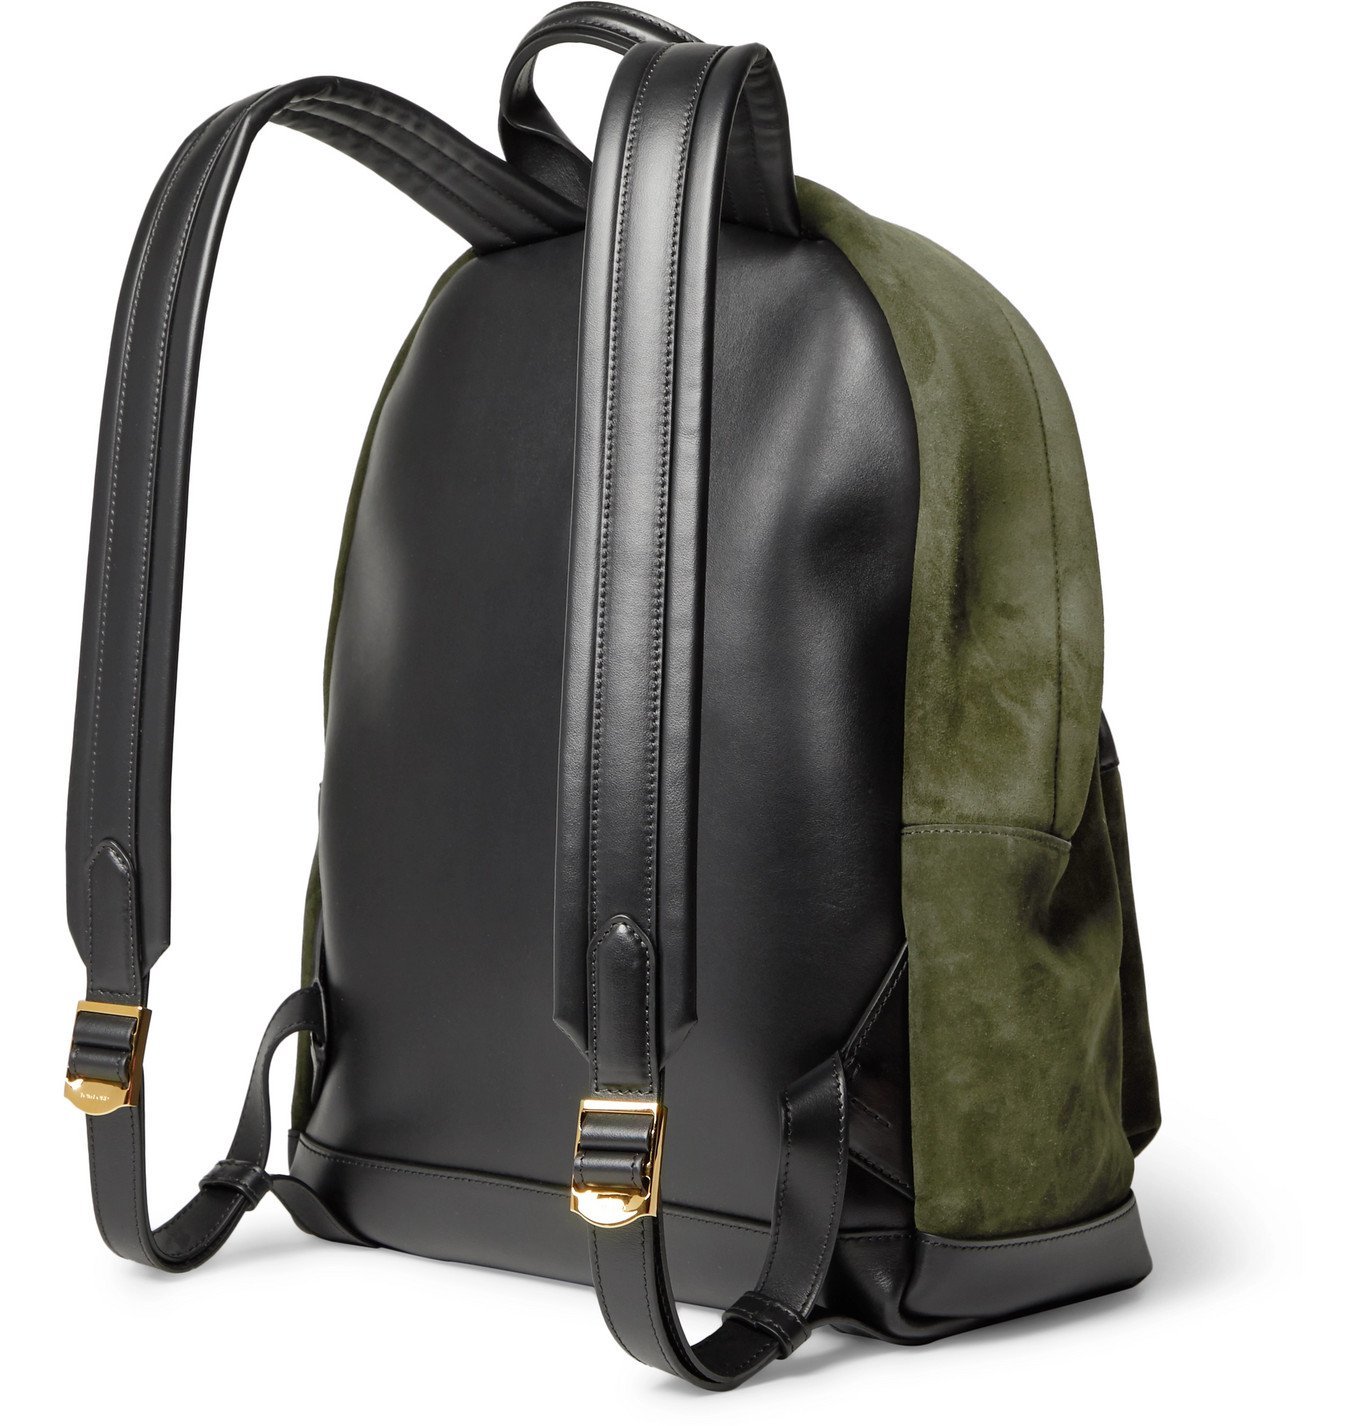 TOM FORD - Suede and Leather Backpack - Green TOM FORD